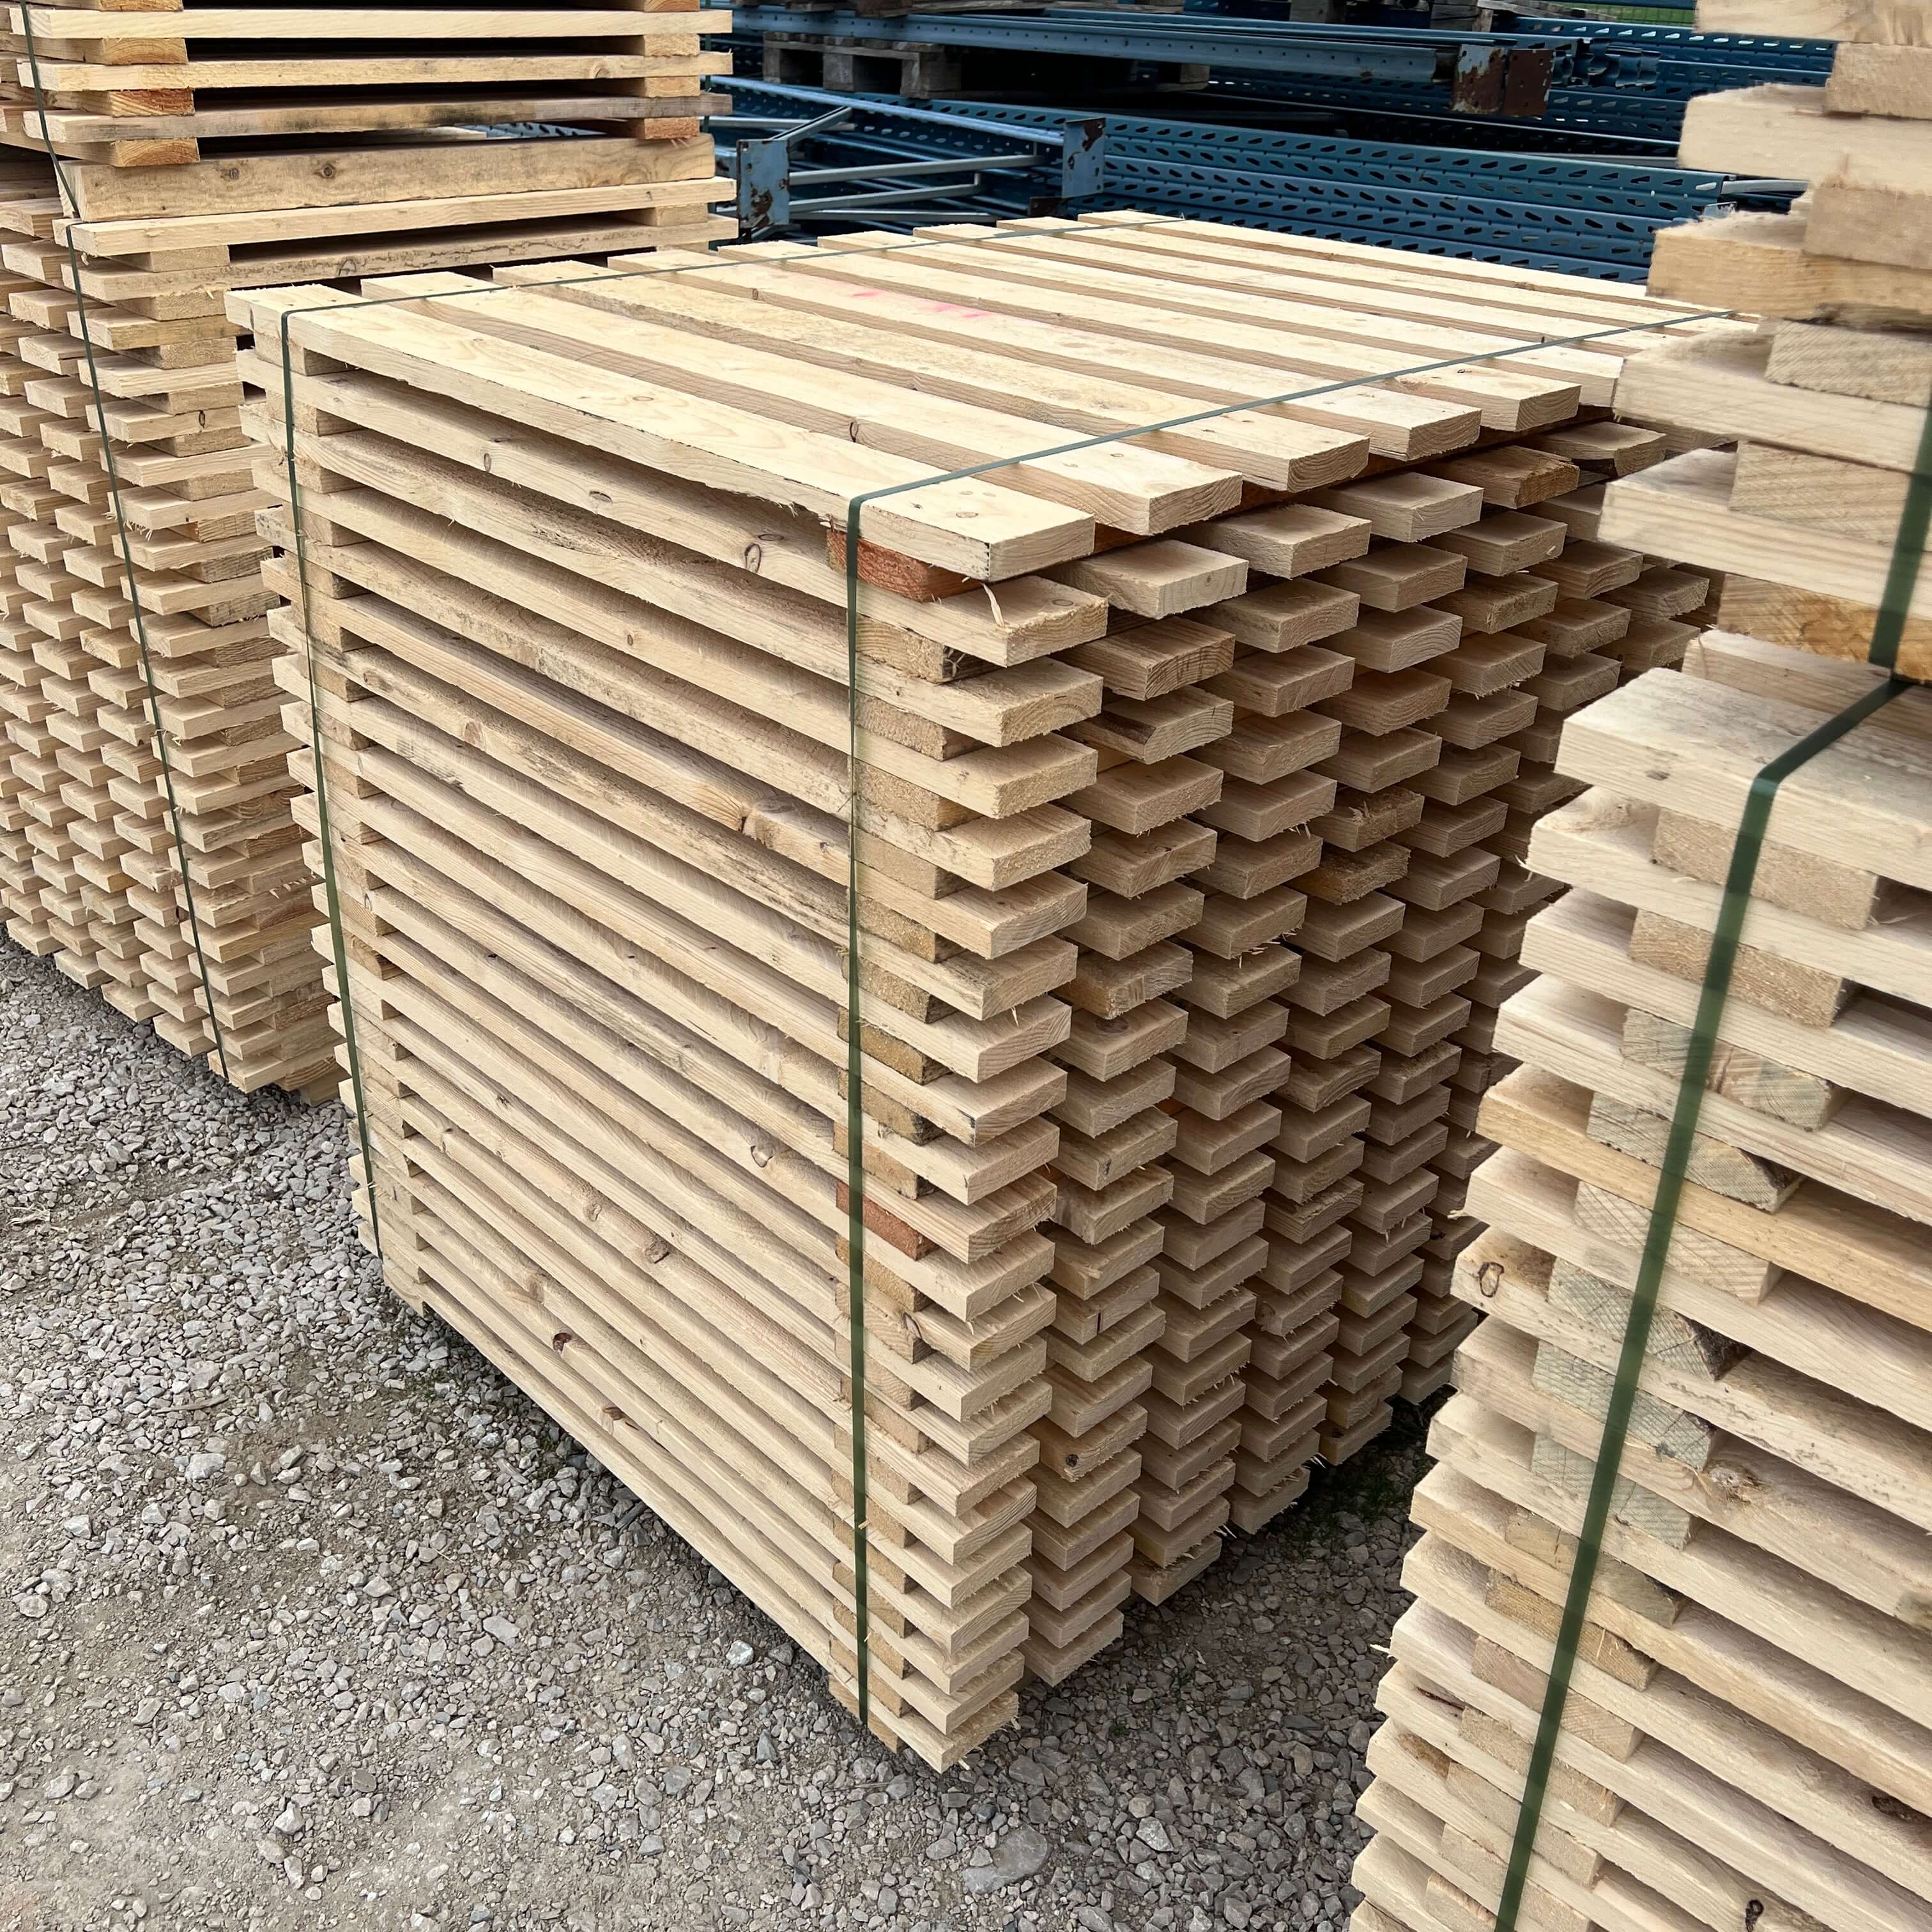 WOODEN TRAY 1340 X 1000 LOAD 800 KG